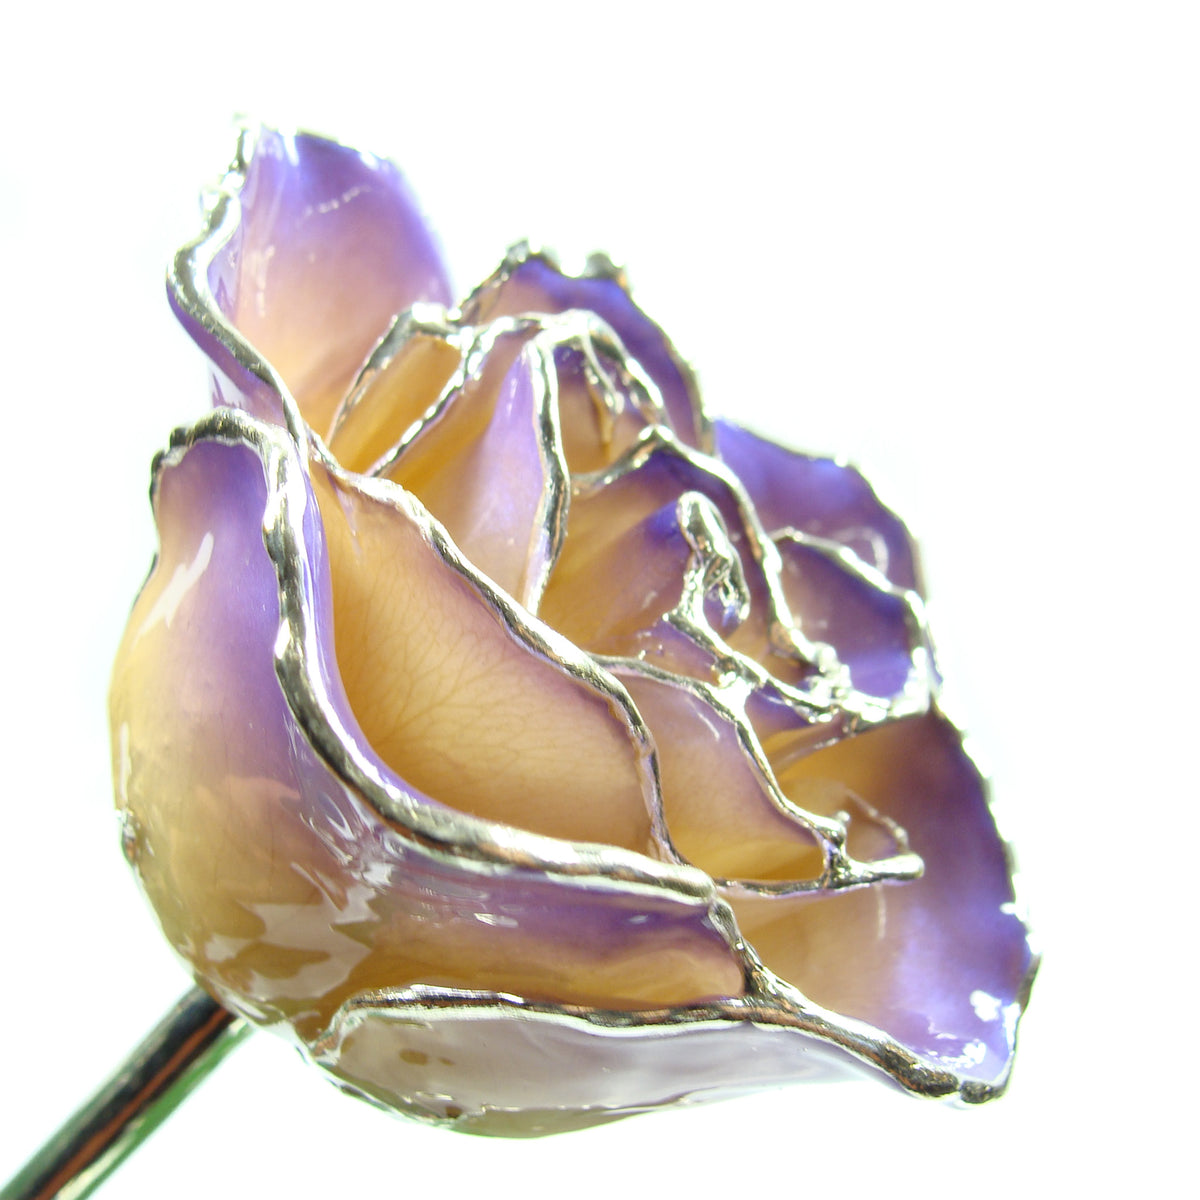 Silver Trimmed Forever Rose with White to Purple Petals. View of Stem, Leaves, and Rose Petals and Showing Detail of Silver Trim